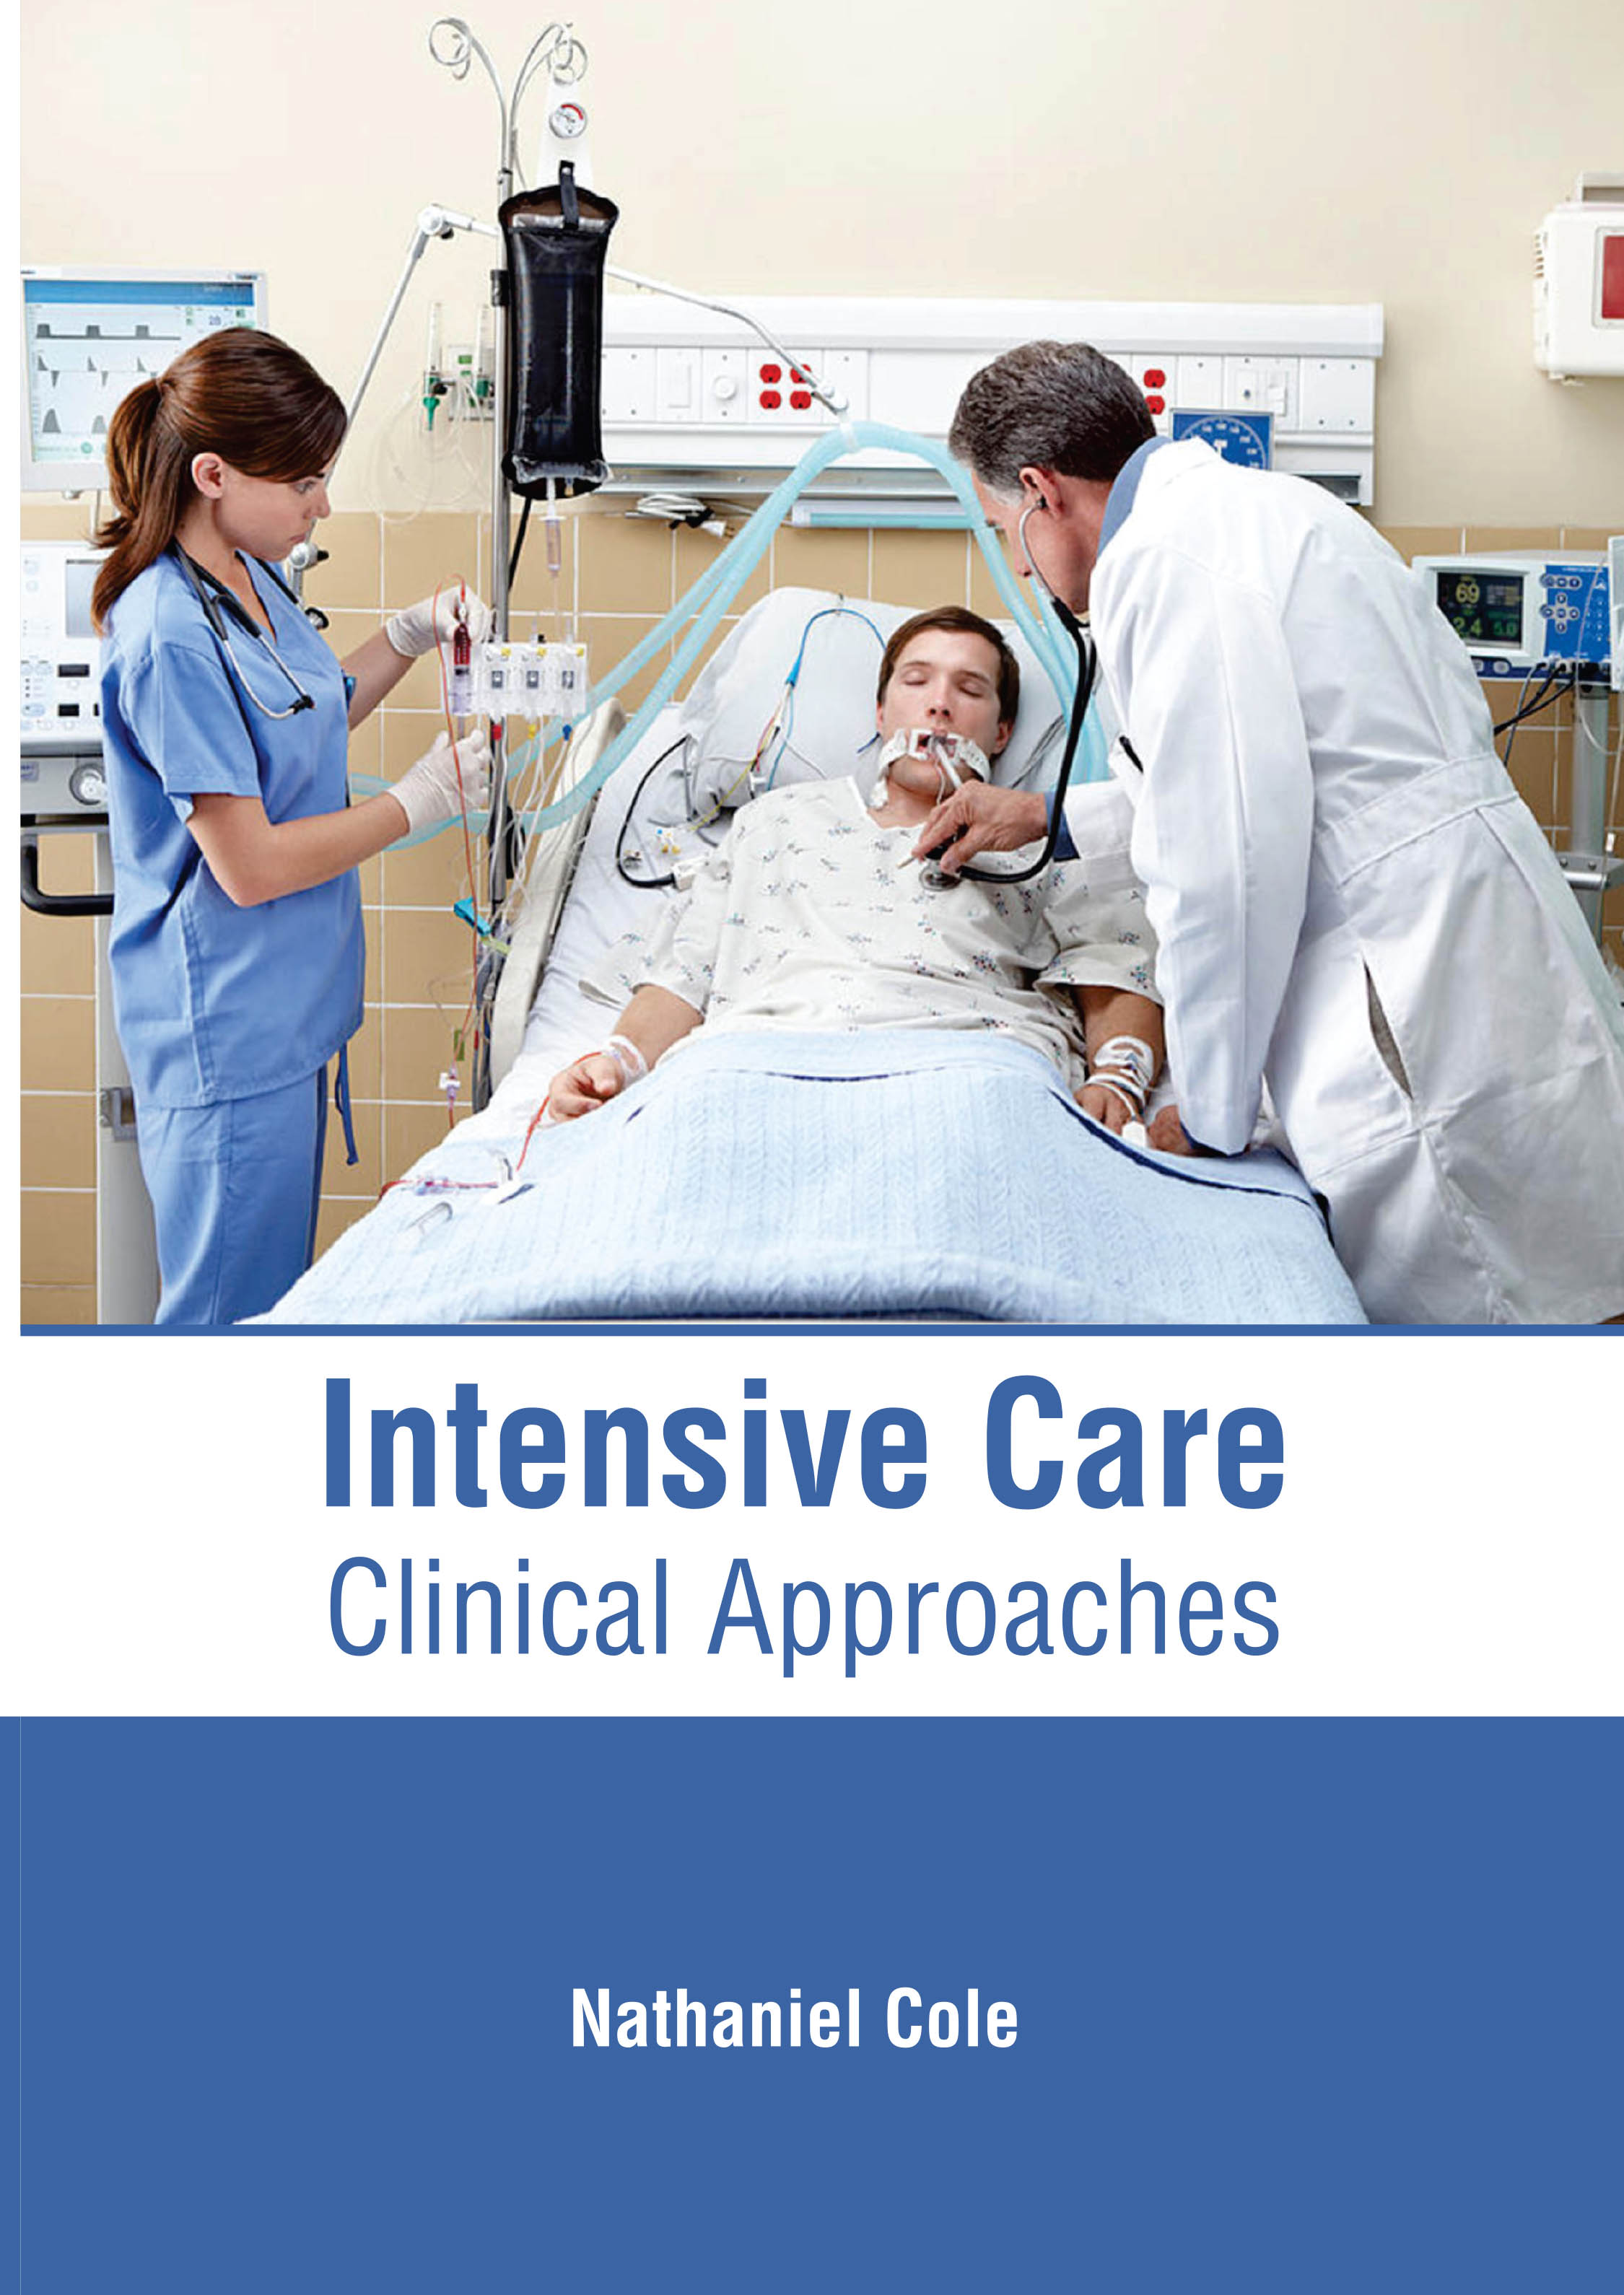 Intensive Care: Clinical Approaches